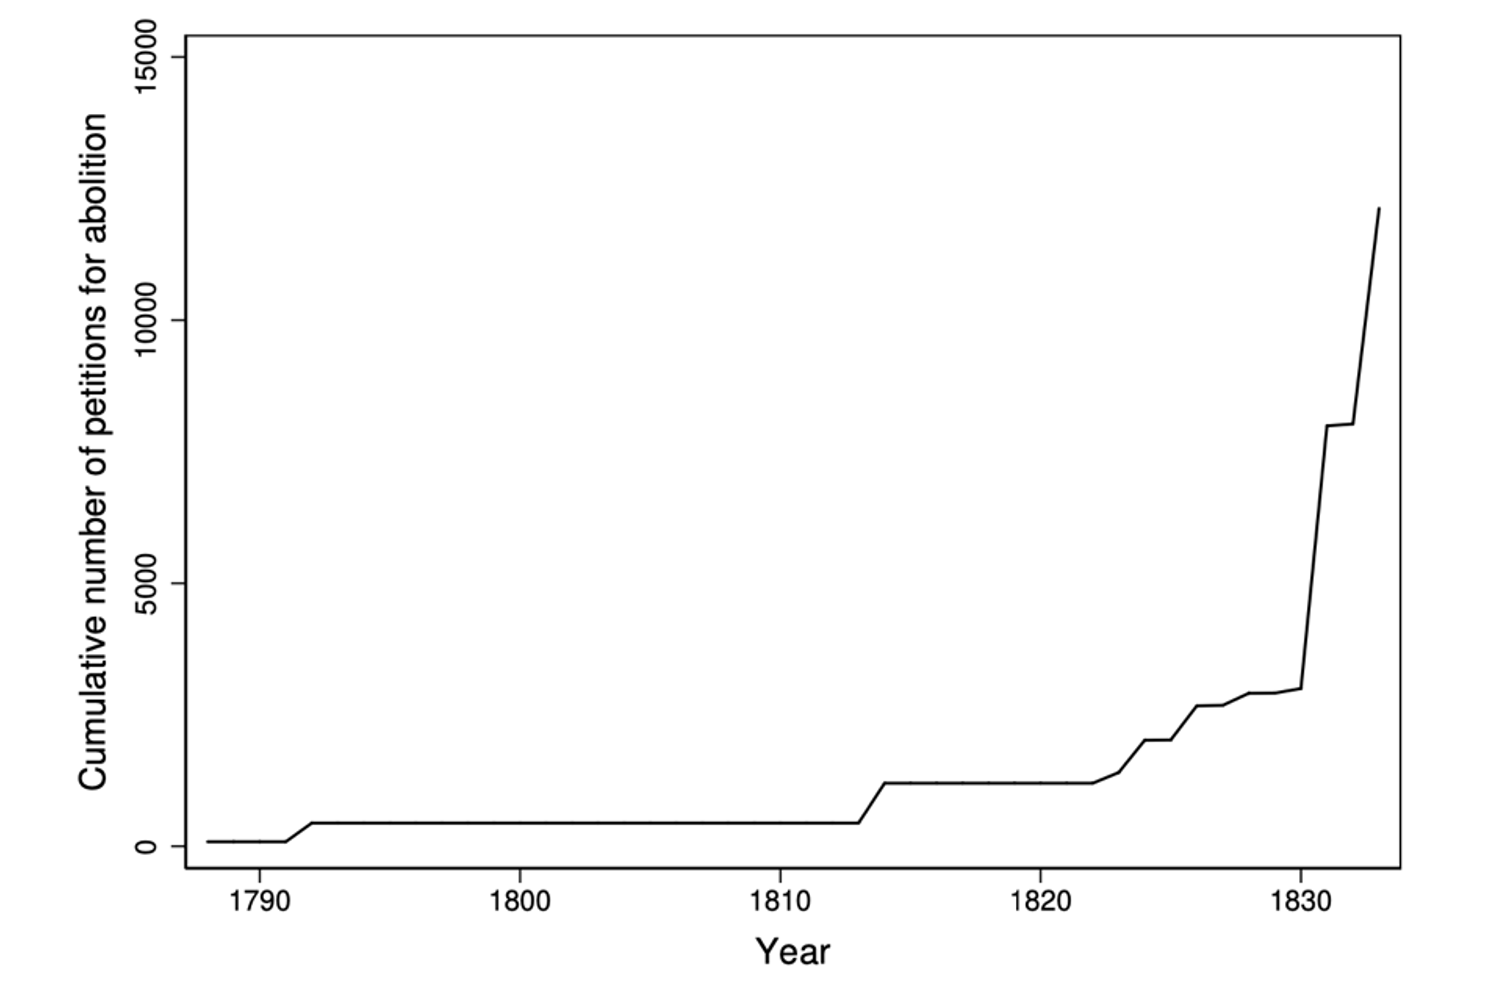 Figure 1 The cumulative number of petitions for abolition sent to Parliament